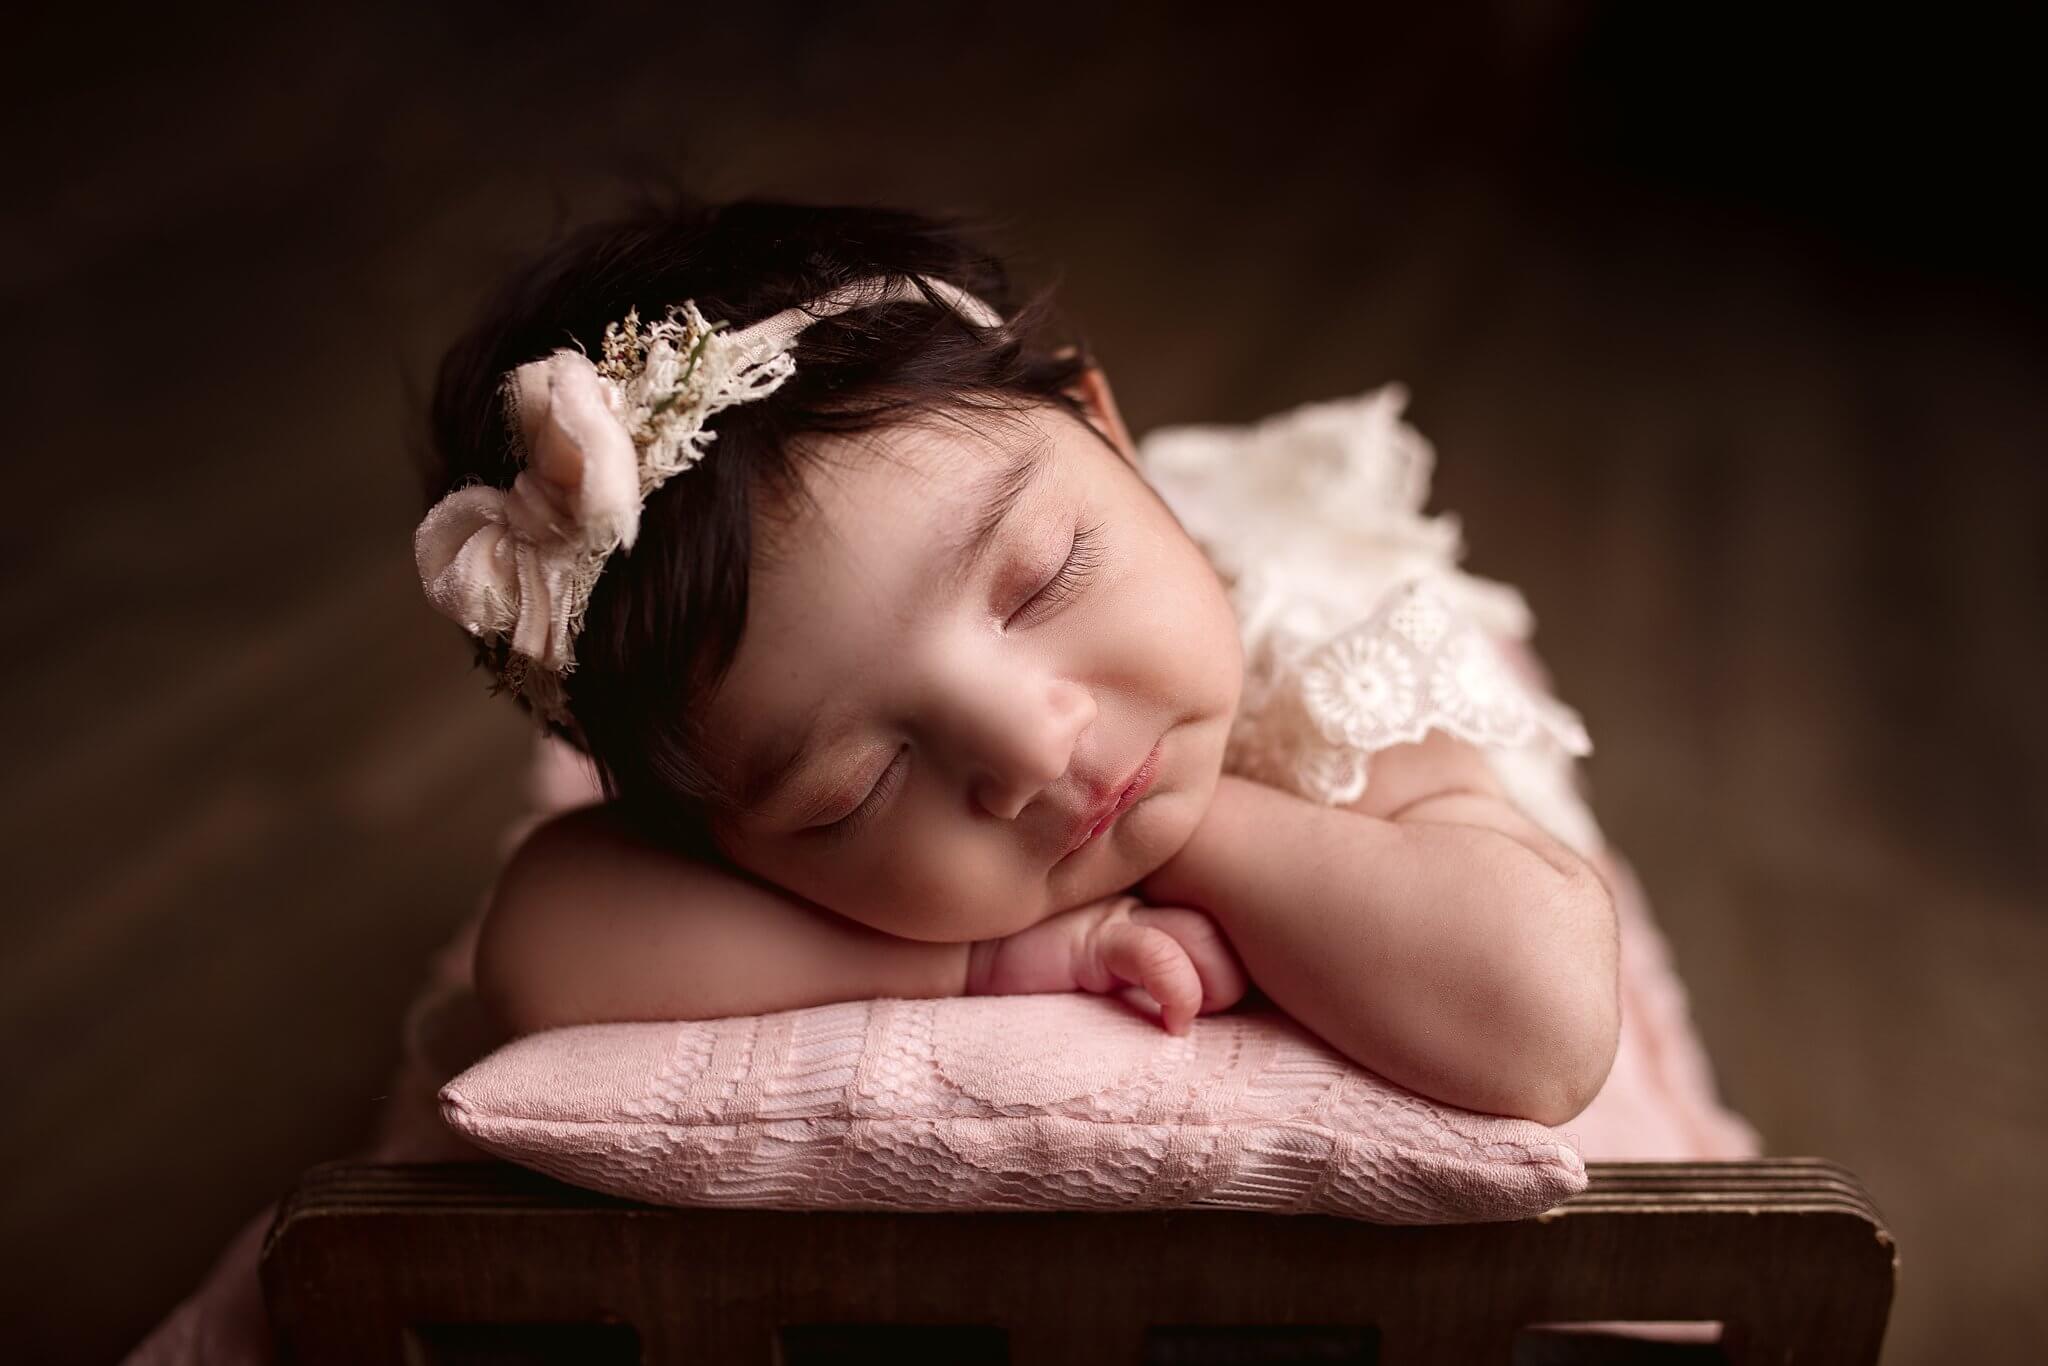 Newborn baby girl with her head on her hands on a pink pillow, sleeping and facing the camera